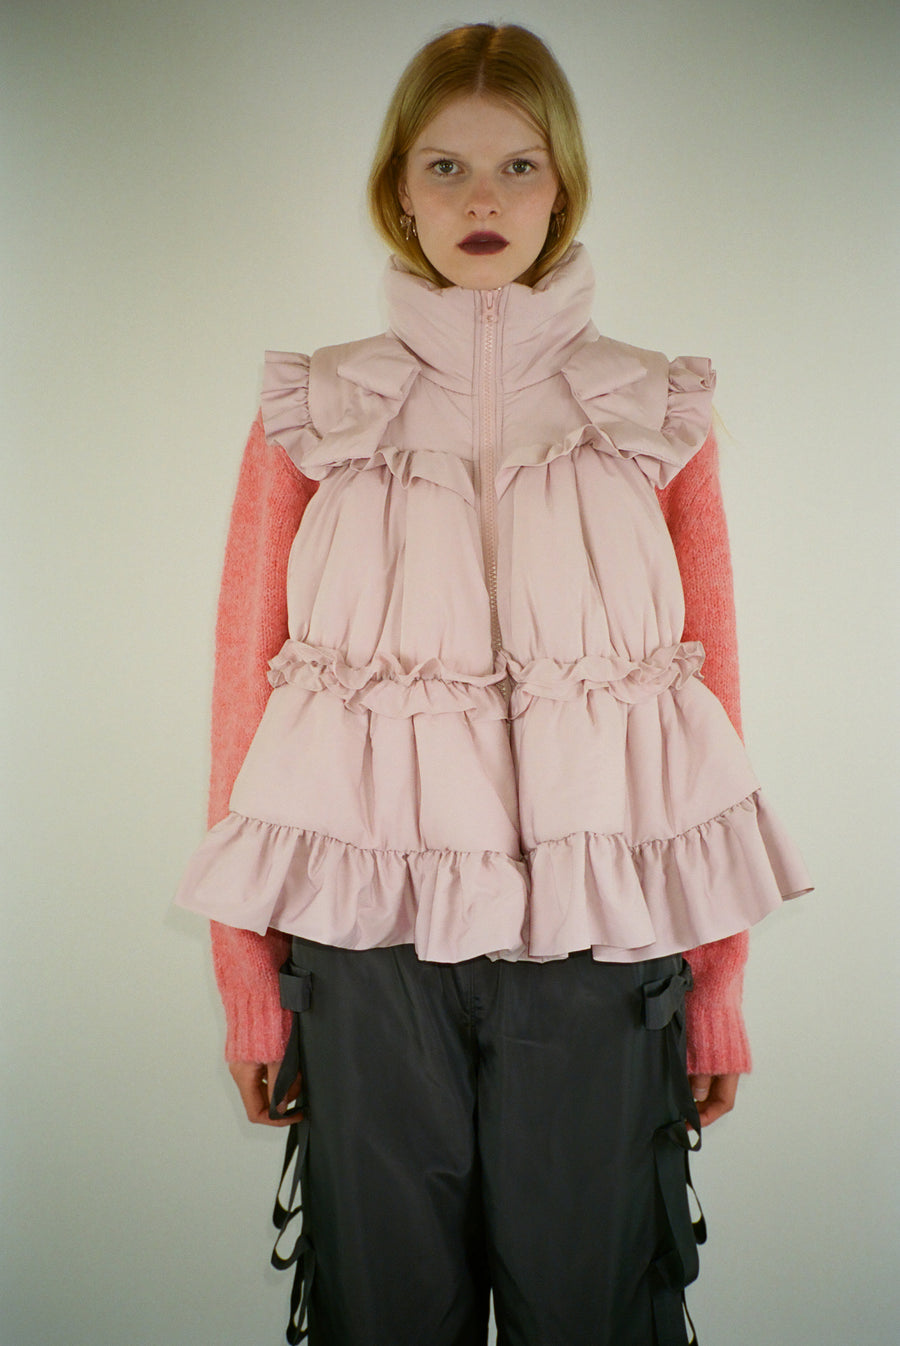 Puffer vest in pink with ruffle details on model